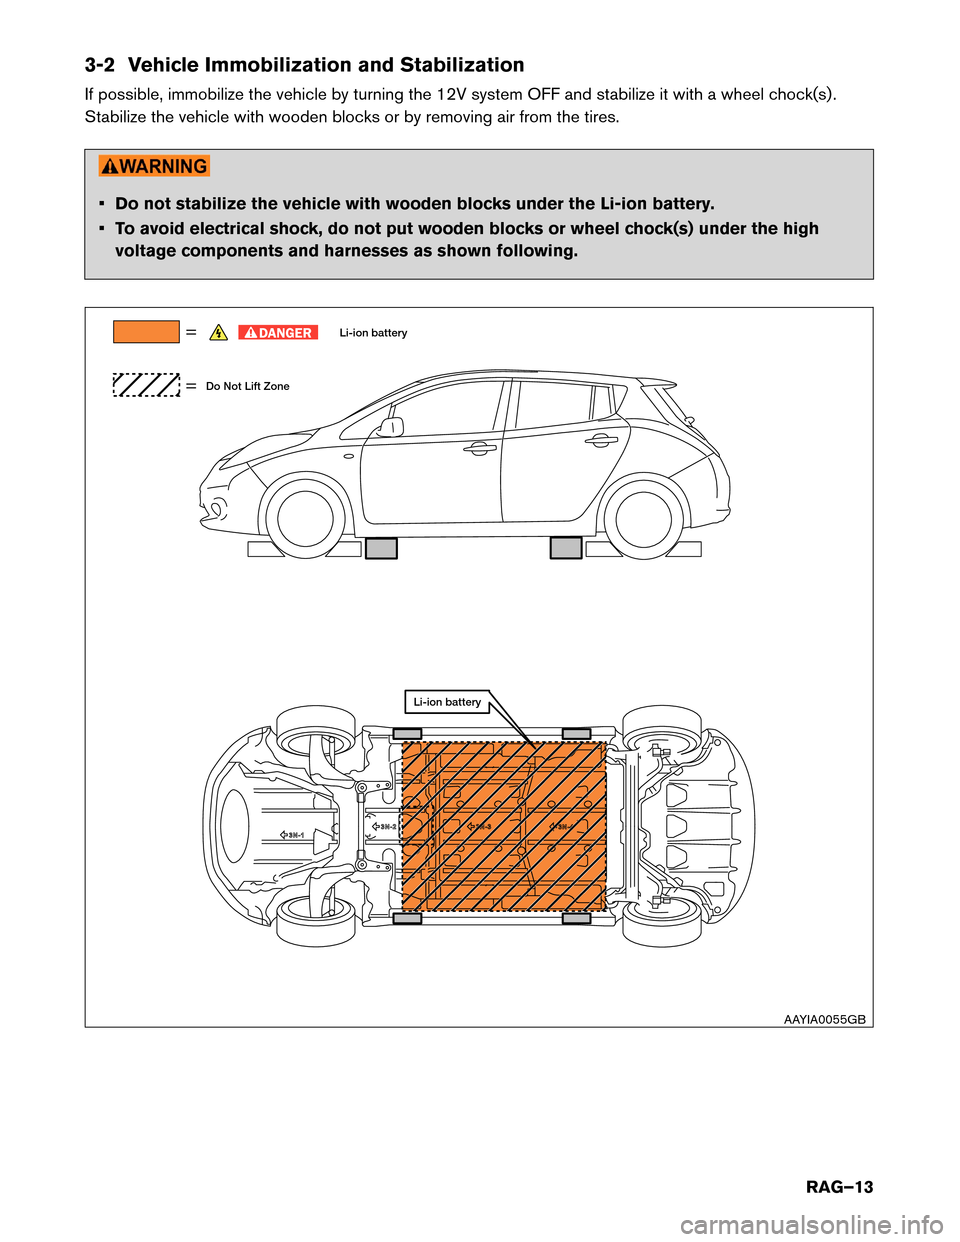 NISSAN LEAF 2014 1.G Roadside Assistance Guide 3-2 Vehicle Immobilization and Stabilization
If
possible, immobilize the vehicle by turning the 12V system OFF and stabilize it with a wheel chock(s) .
Stabilize the vehicle with wooden blocks or by r